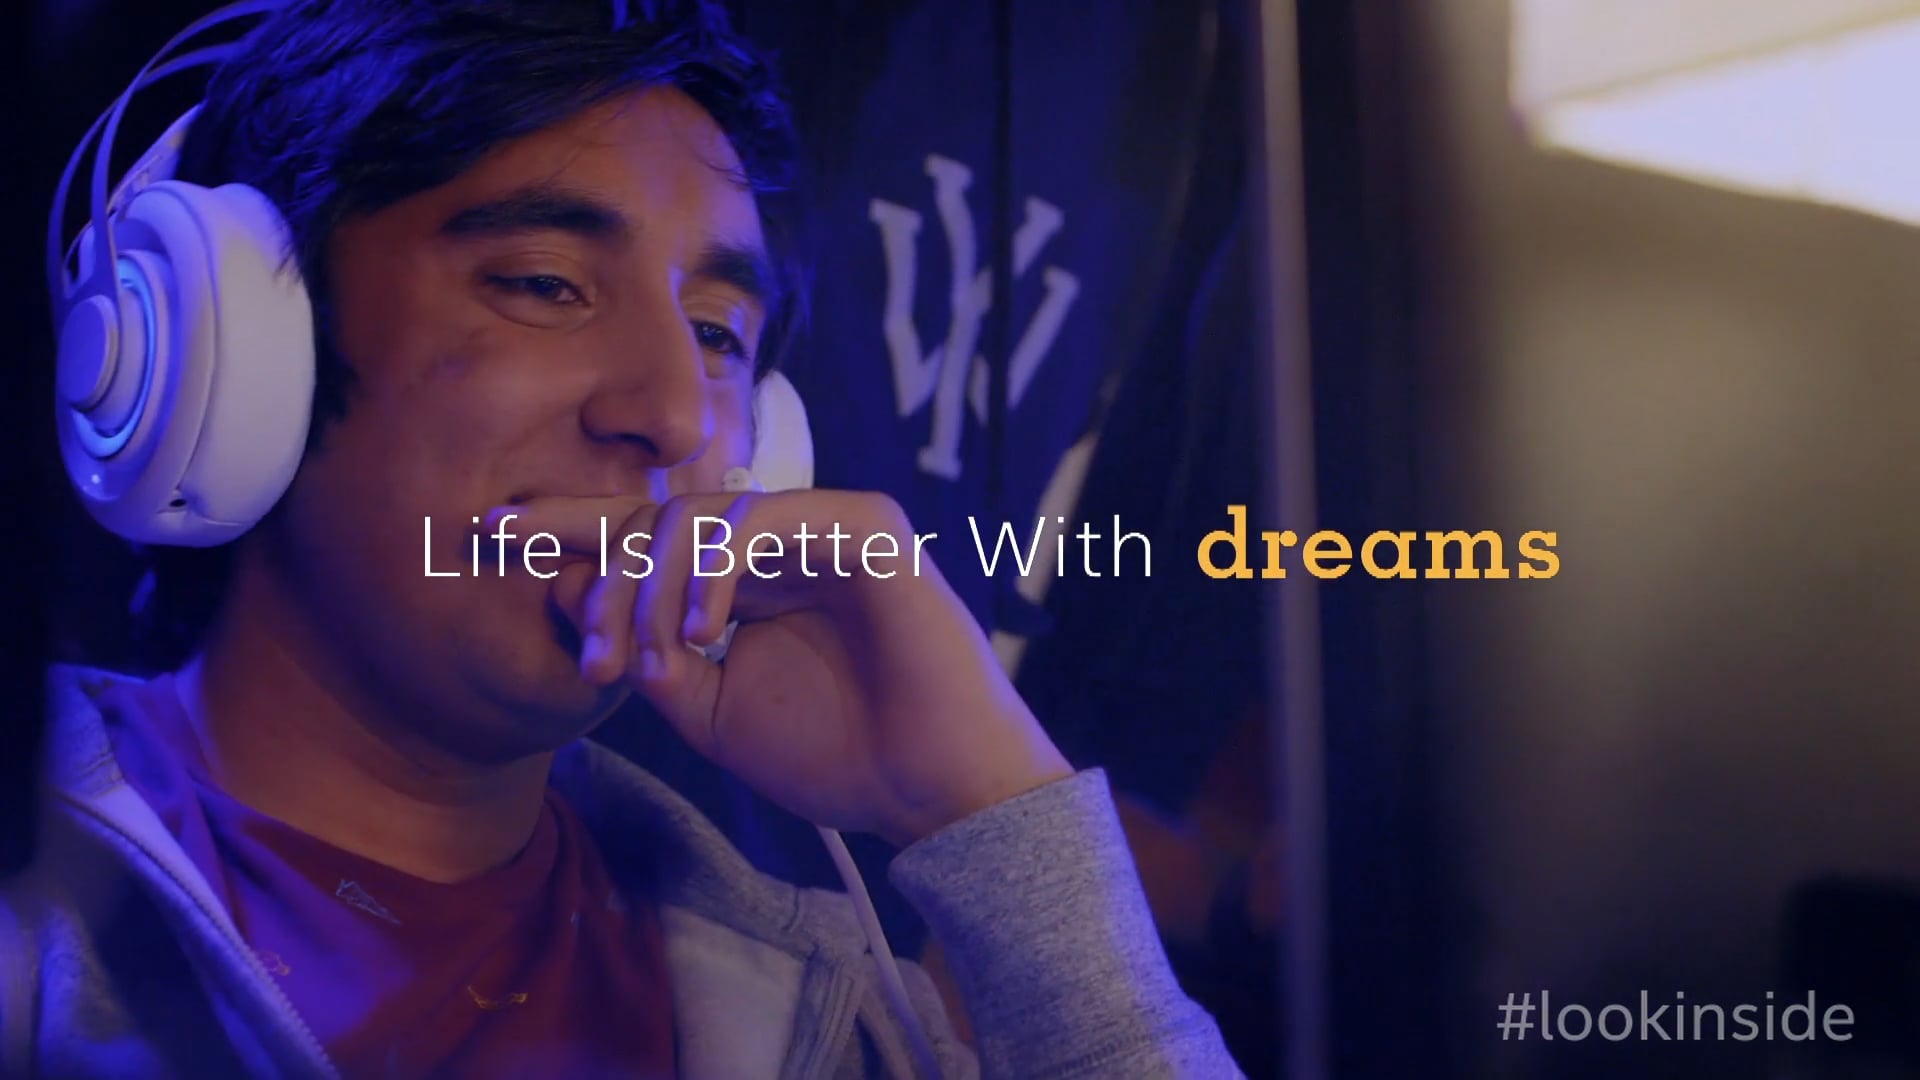 INTEL_LIFE_IS_BETTER_WITH_DREAMS_FINAL-1_1